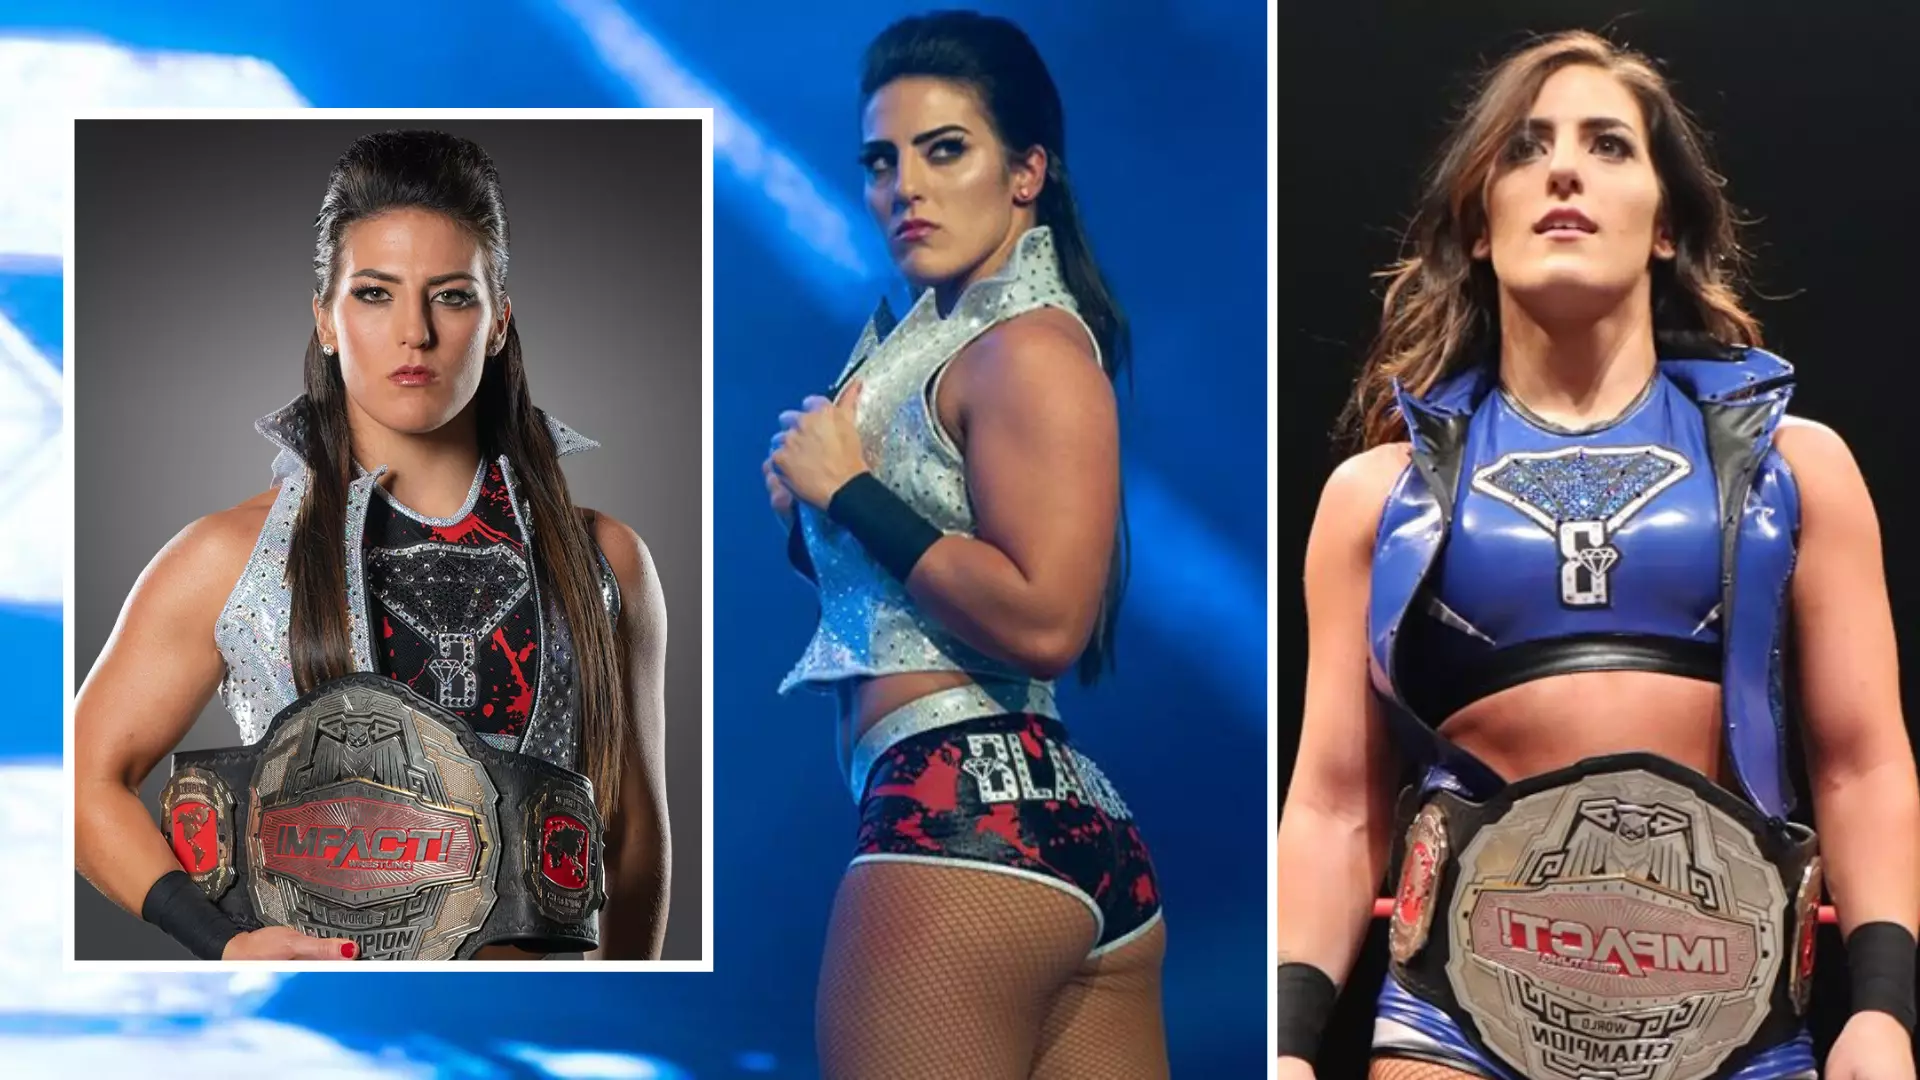  Tessa Blanchard: Wrestling's First Female World Champ Launches Staunch Defence For Intergender Wrestling